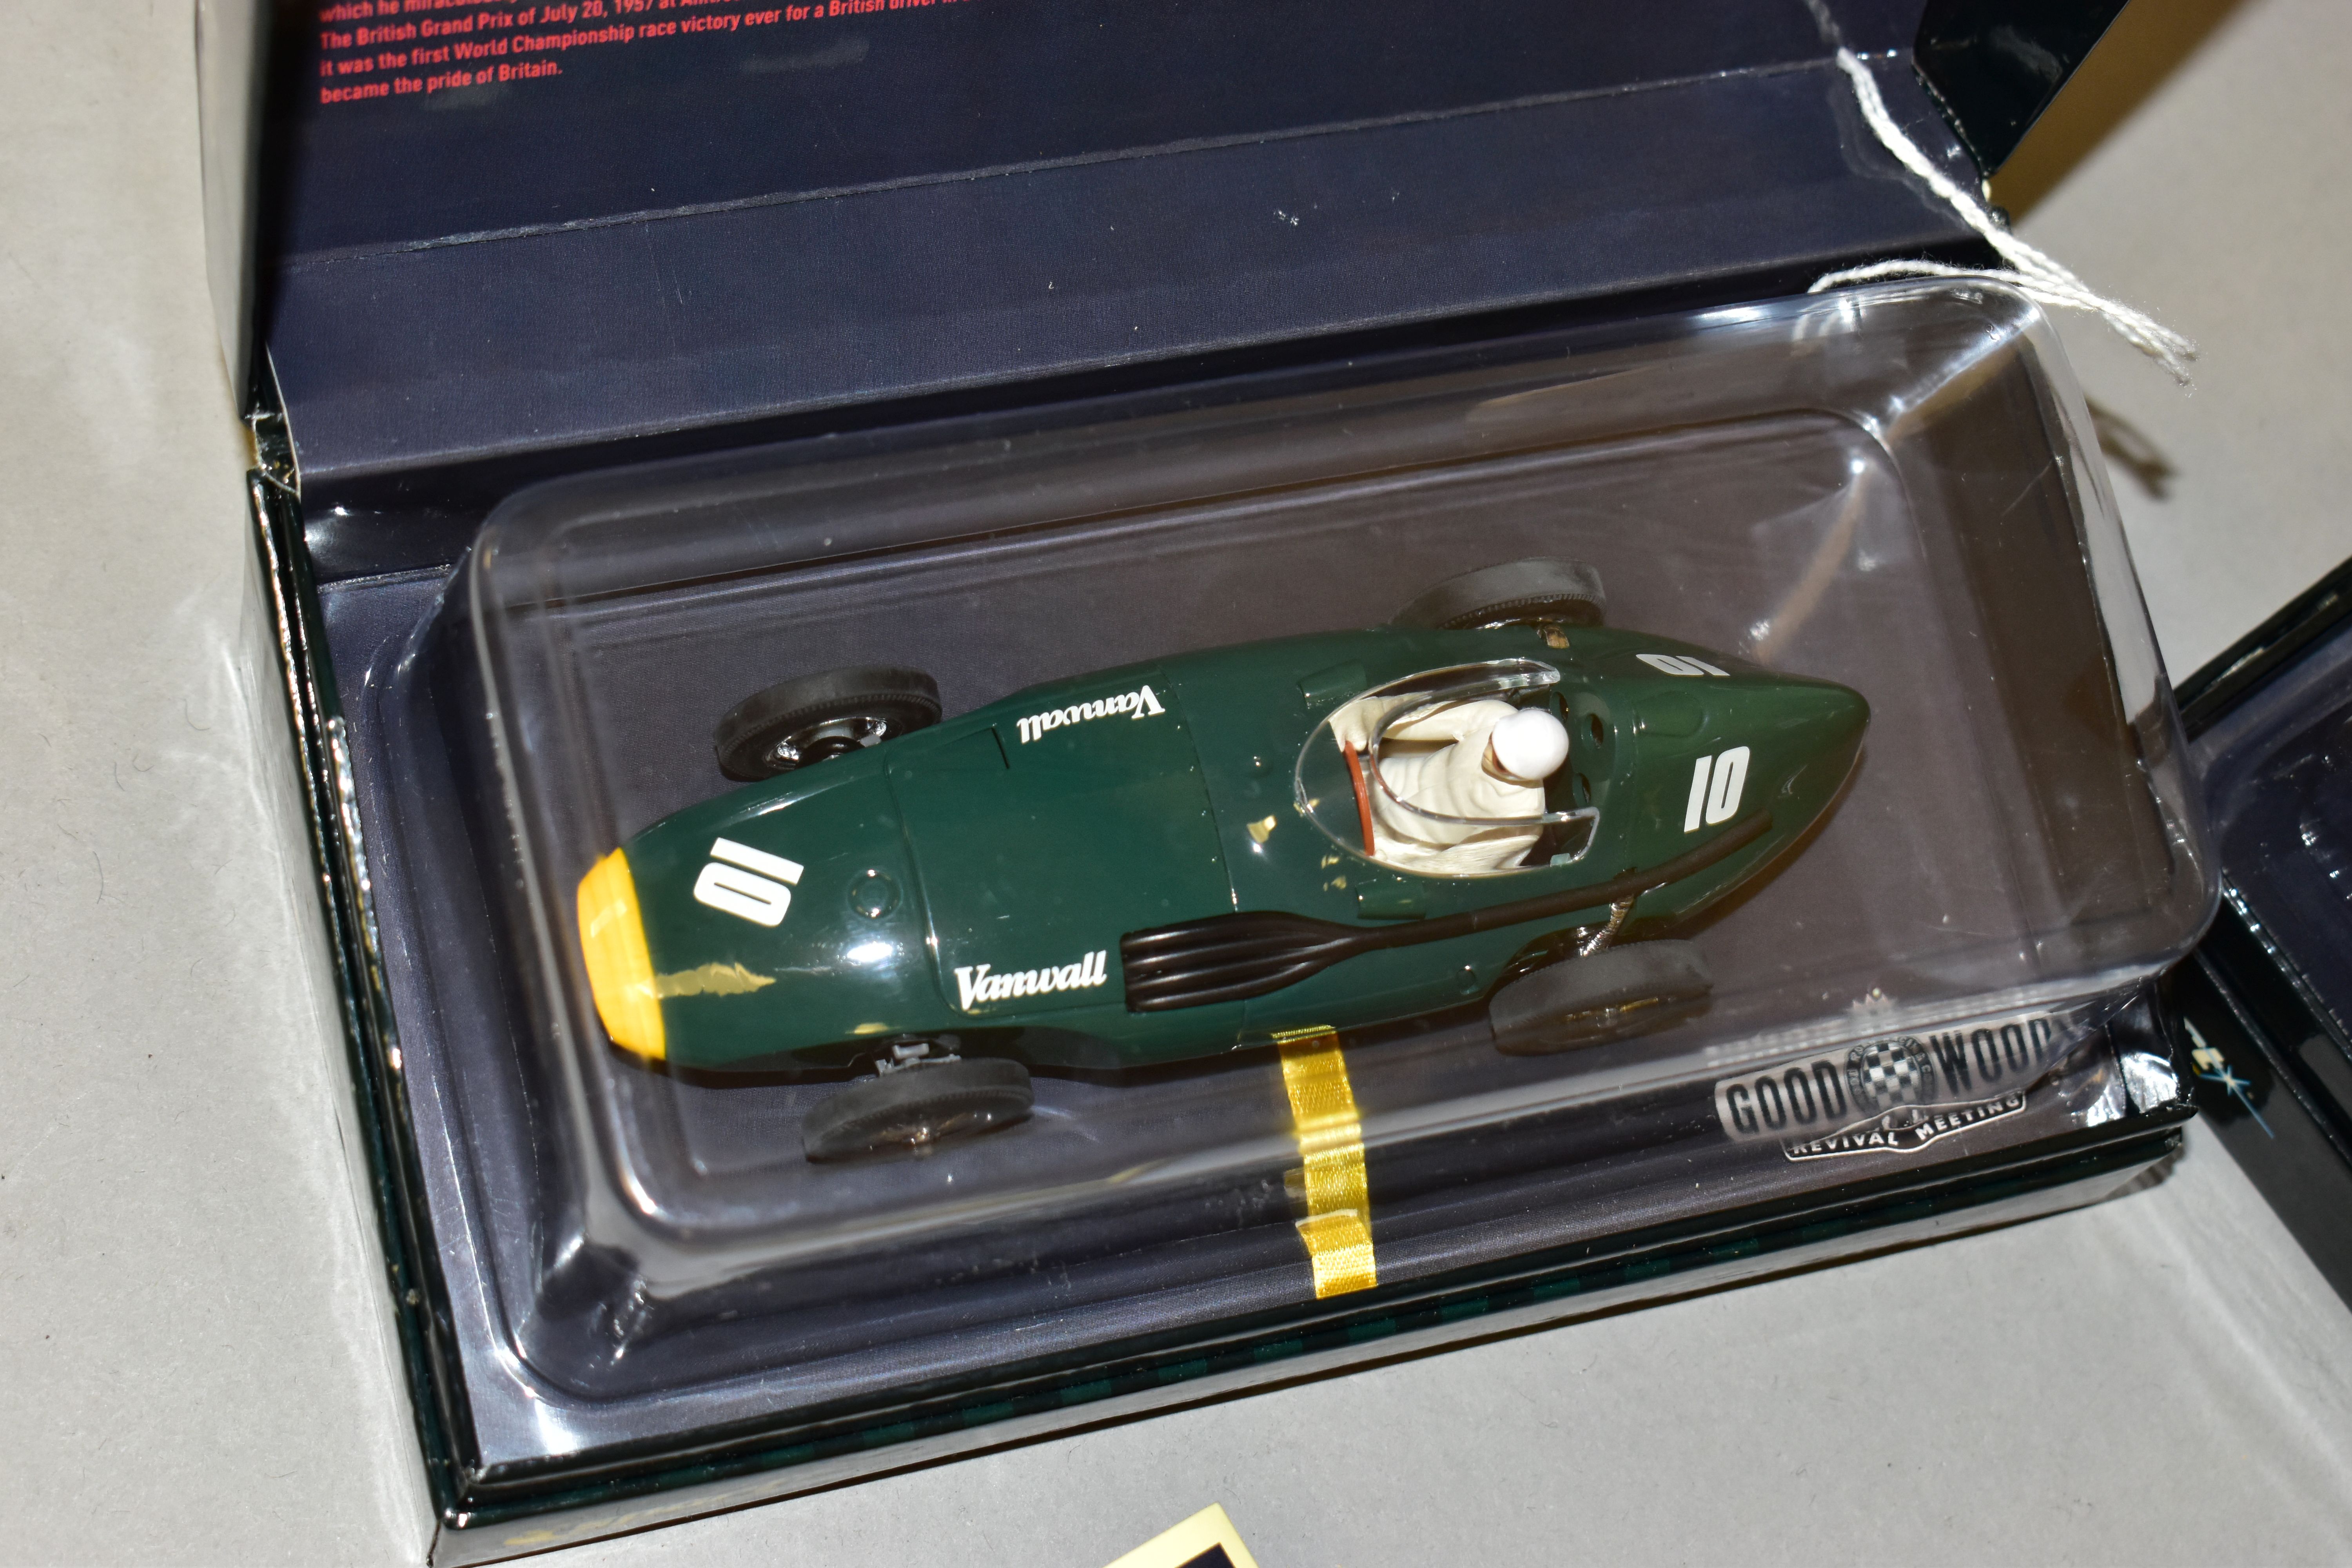 THREE BOXED SCALEXTRIC LIMITED EDITION CLASSIC GRAND PRIX GOODWOOD REVIVAL MEETING F1 RACING CARS, - Image 6 of 8